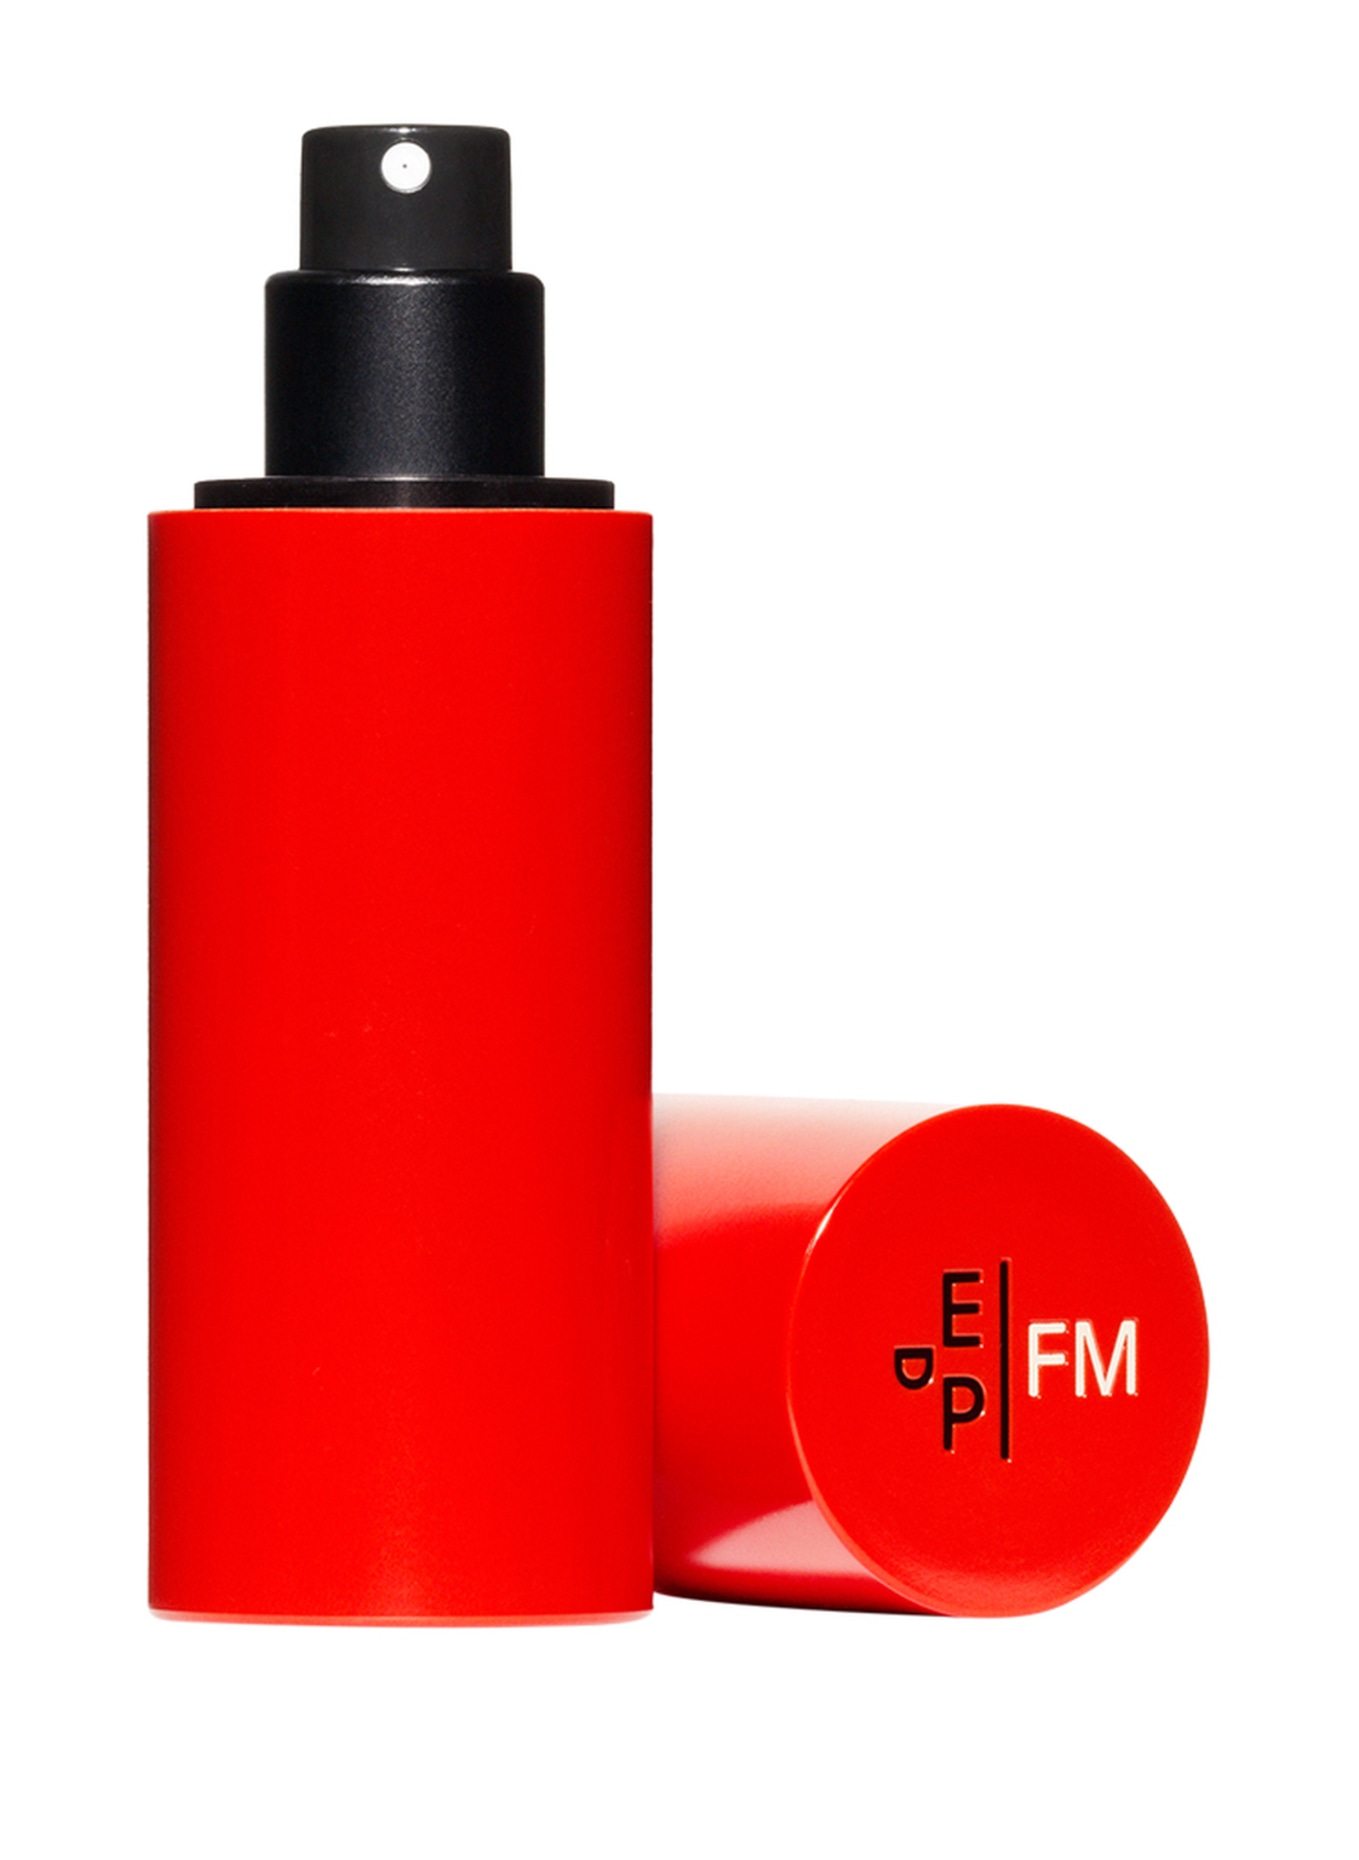 EDITIONS DE PARFUMS FREDERIC MALLE TRAVEL SPRAY CASE, Farbe: RED (Bild 1)